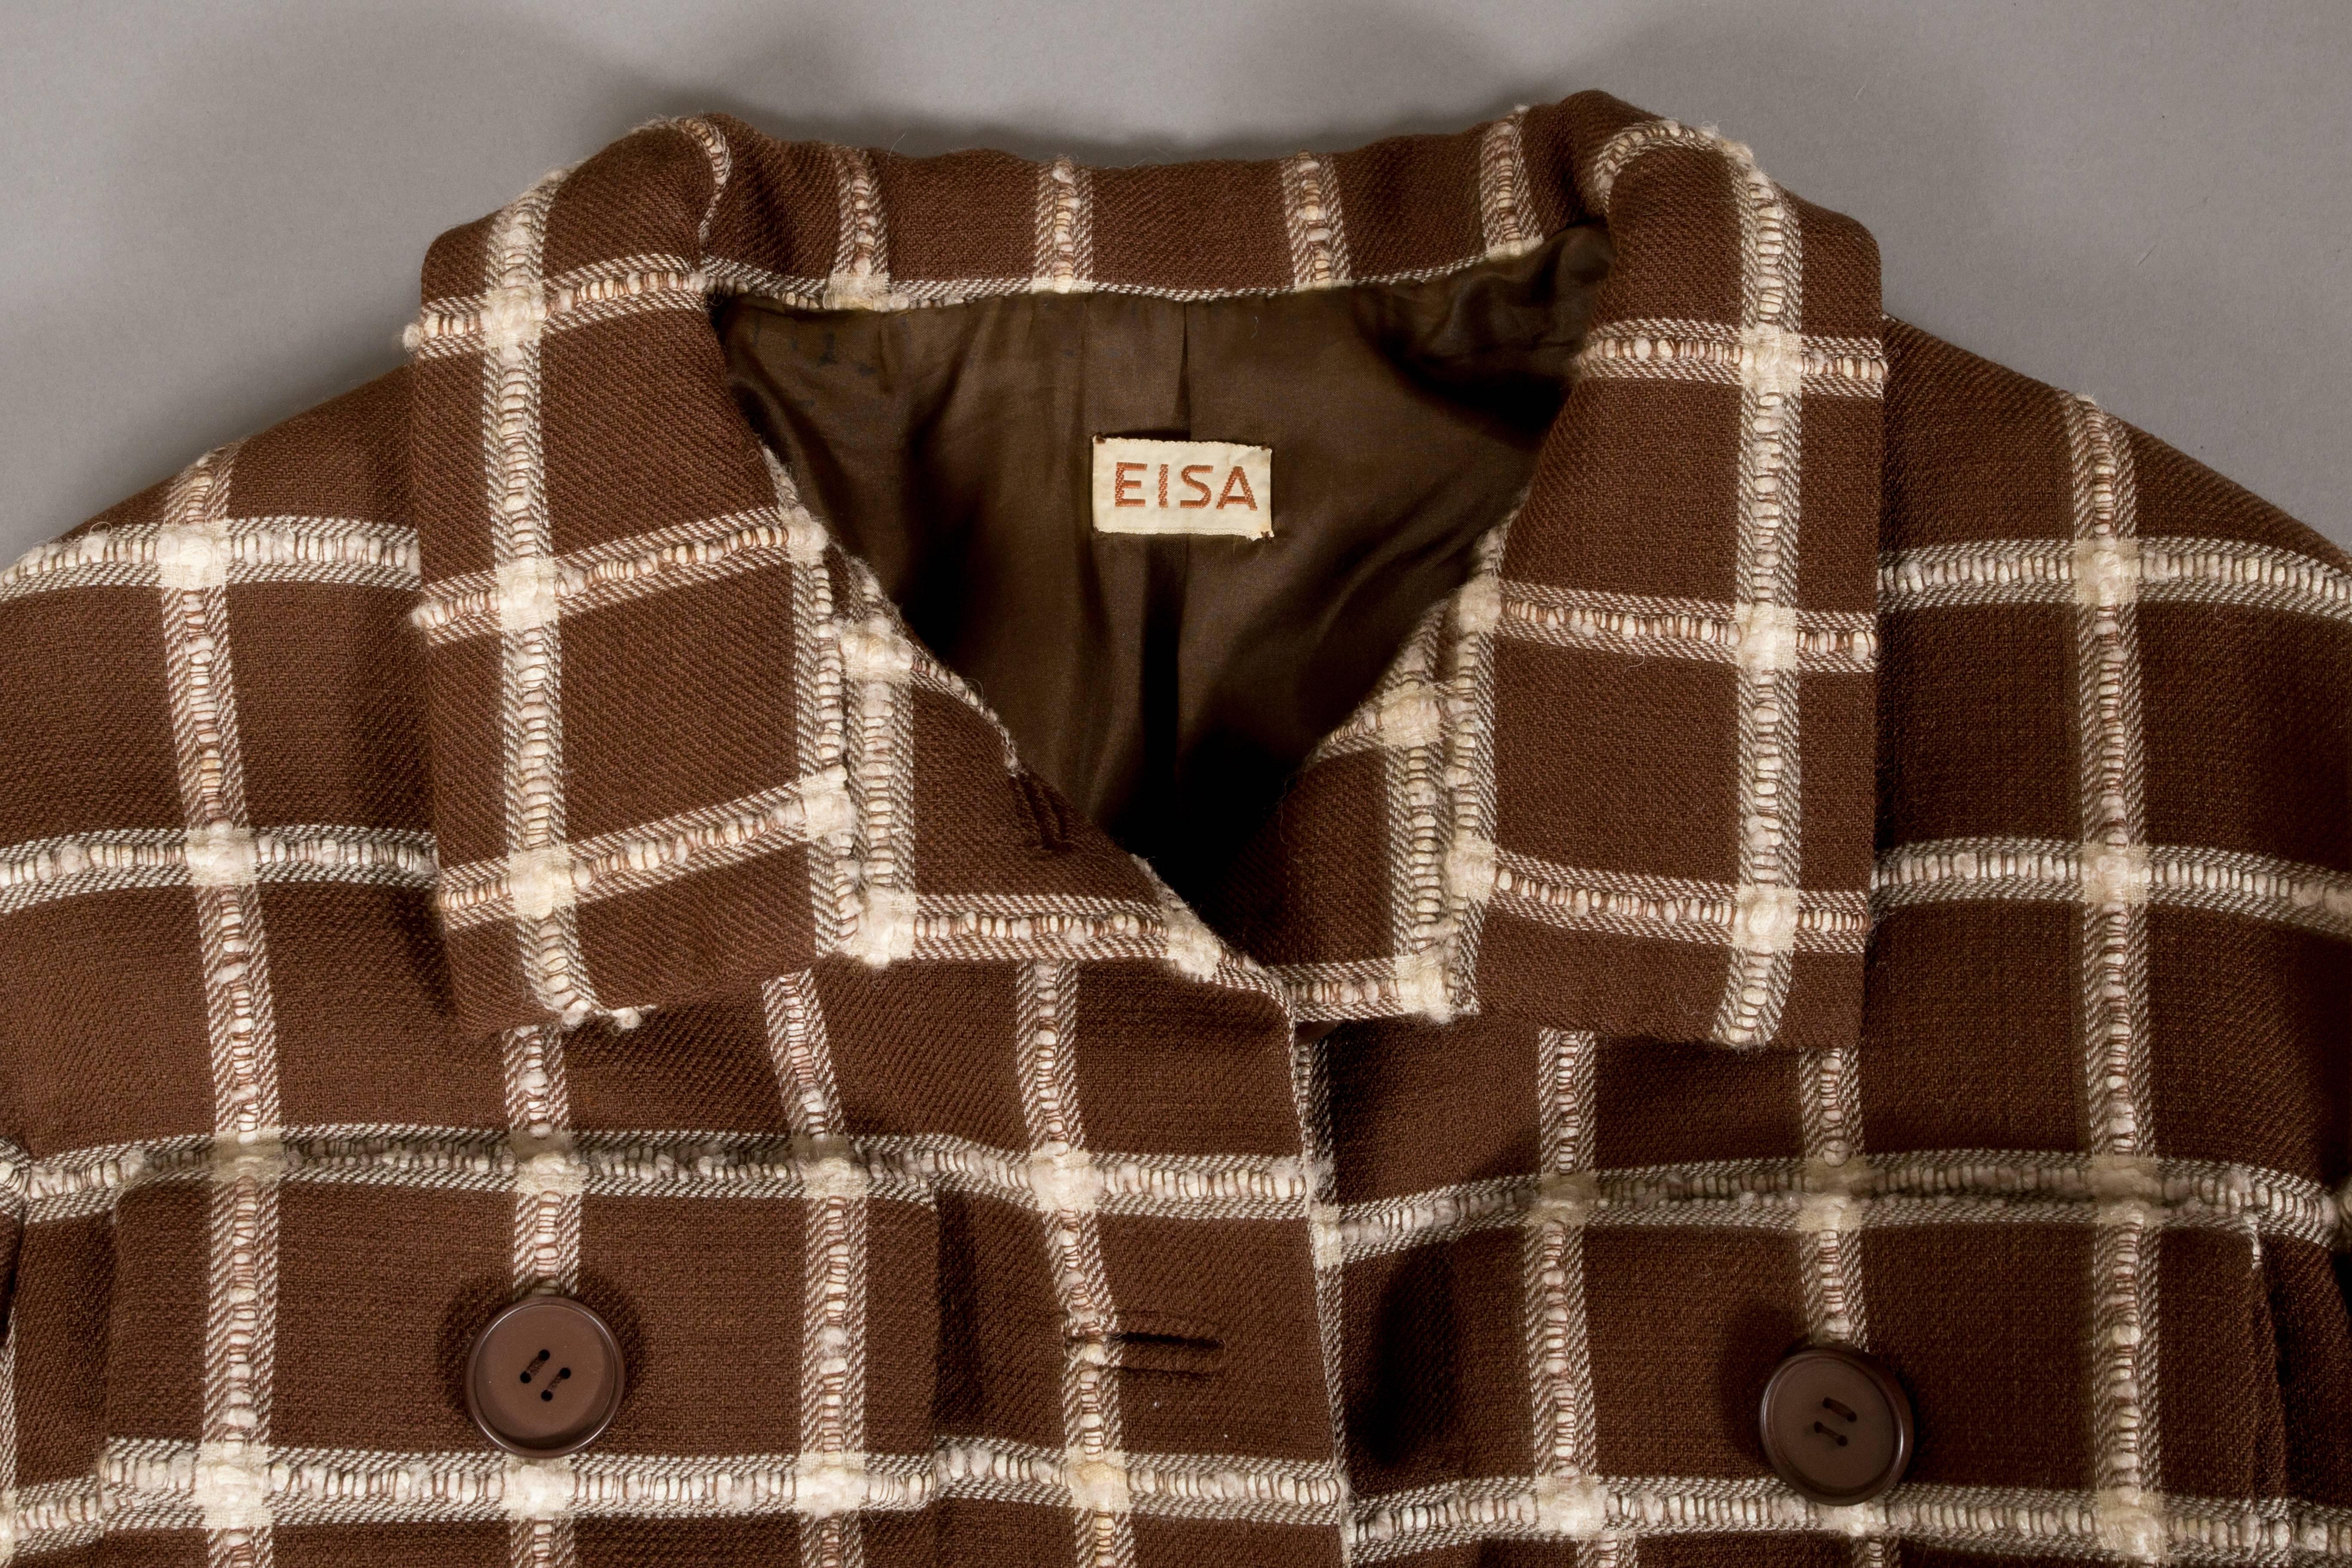 Balenciaga Eisa couture flecked brown and cream checked tweed suit, C. 1965 3